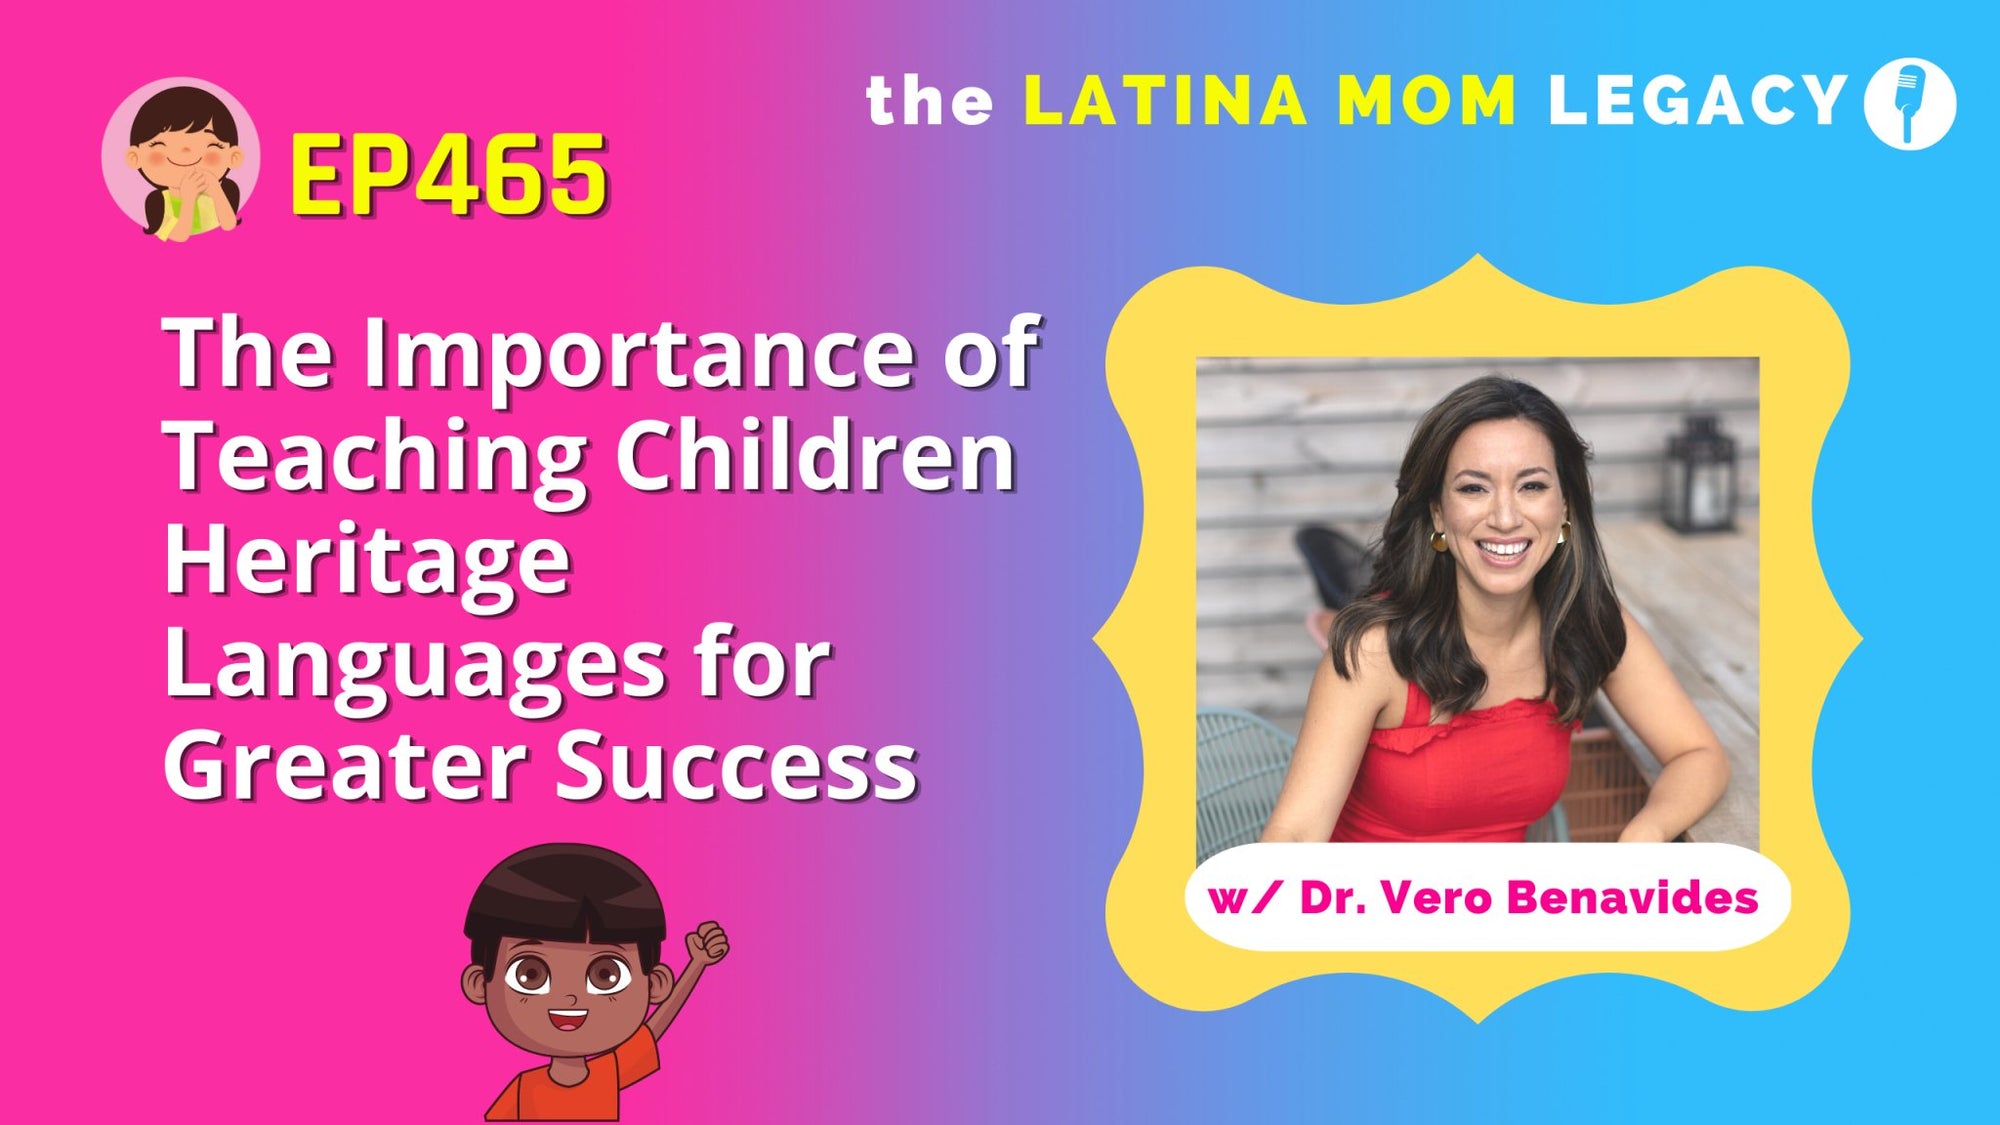 465 - The Importance of Teaching Children Heritage Languages for Greater Success with Vero Benavides - Mi LegaSi